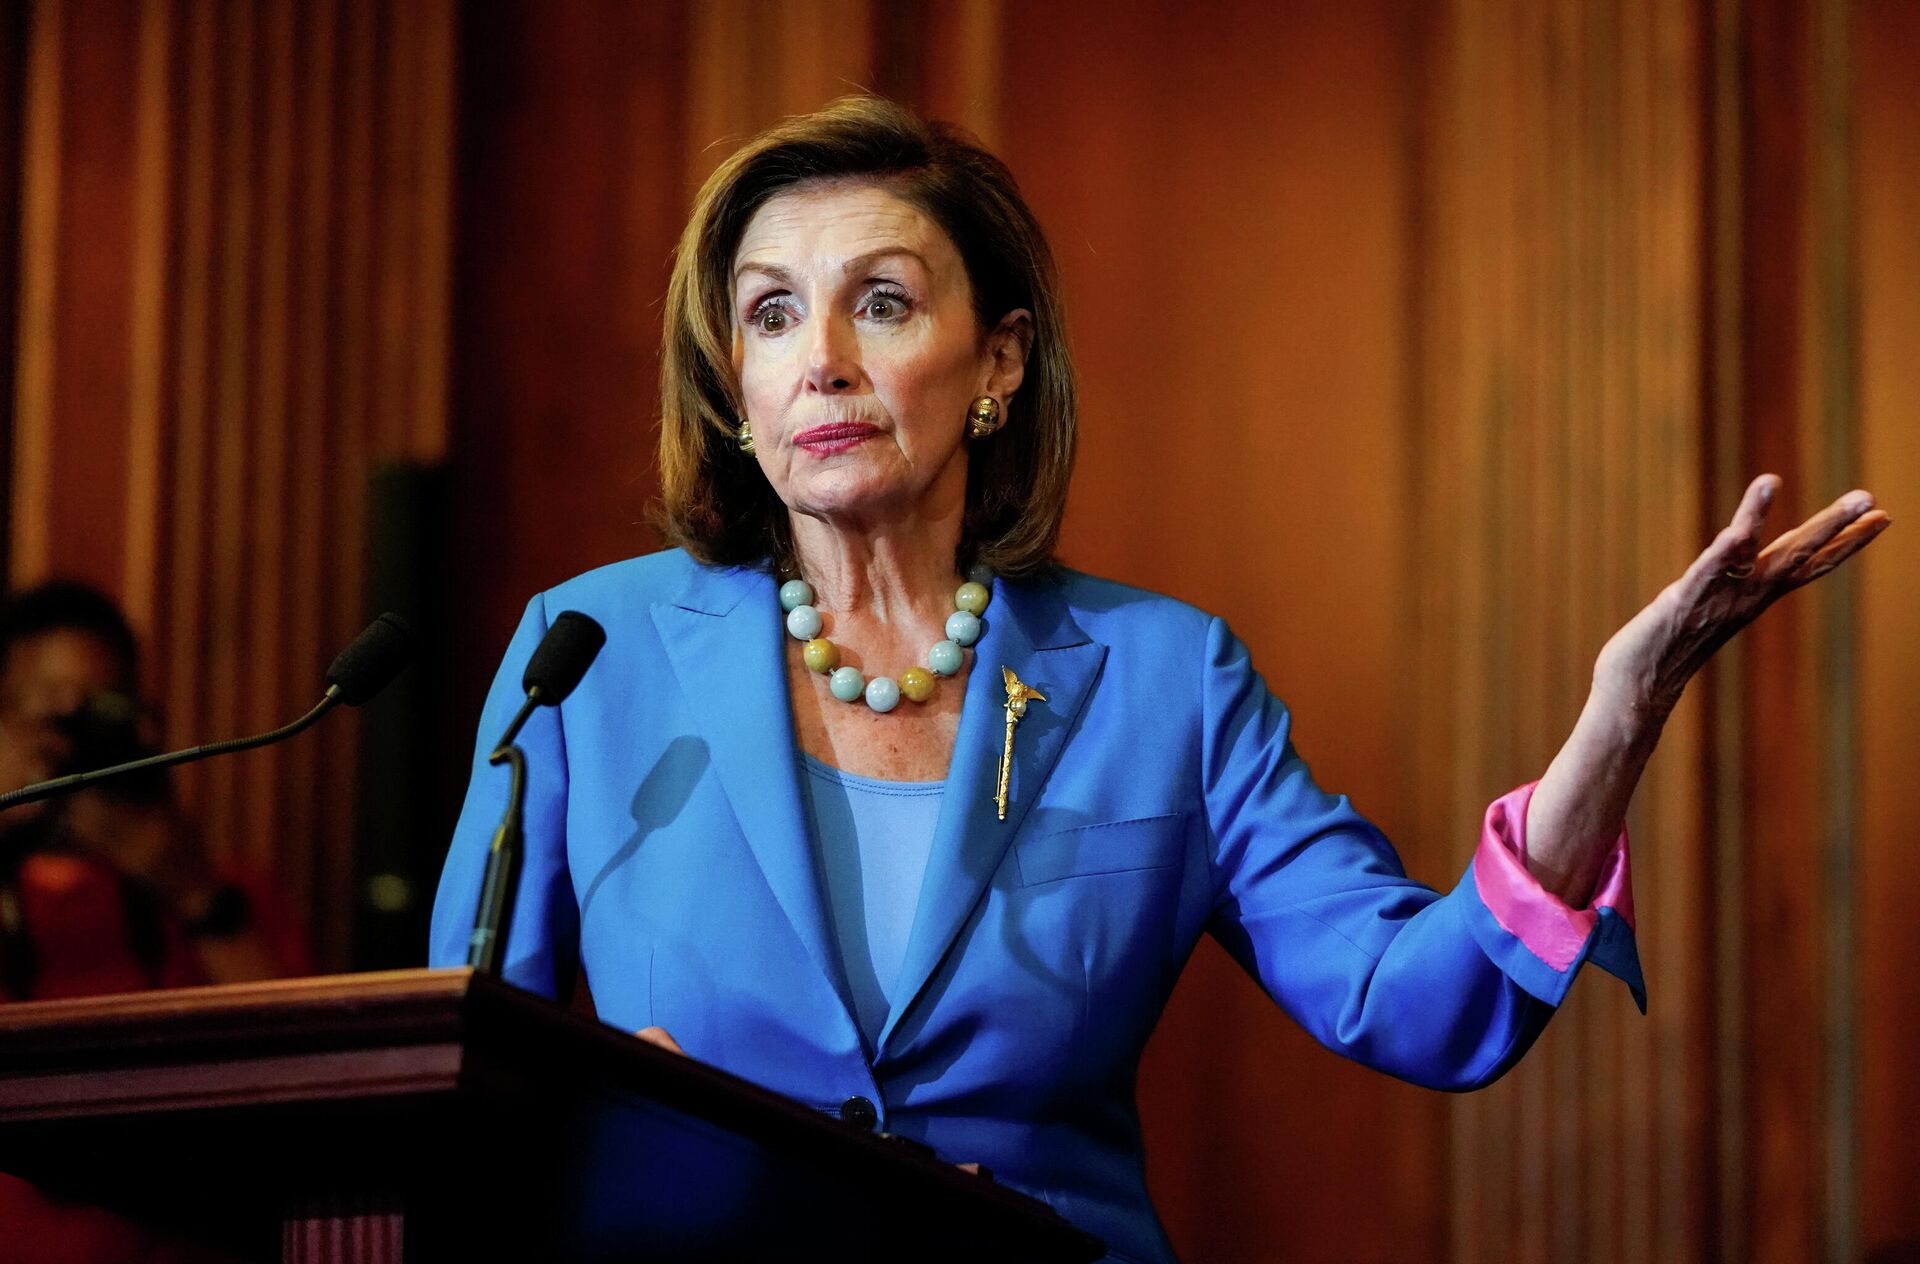 U.S. House Speaker Nancy Pelosi (D-CA) speaks while signing the continuing resolution to avoid a U.S. government shutdown during a bill enrollment ceremony on Capitol Hill in Washington, U.S., September 30, 2021 - Sputnik International, 1920, 05.10.2021